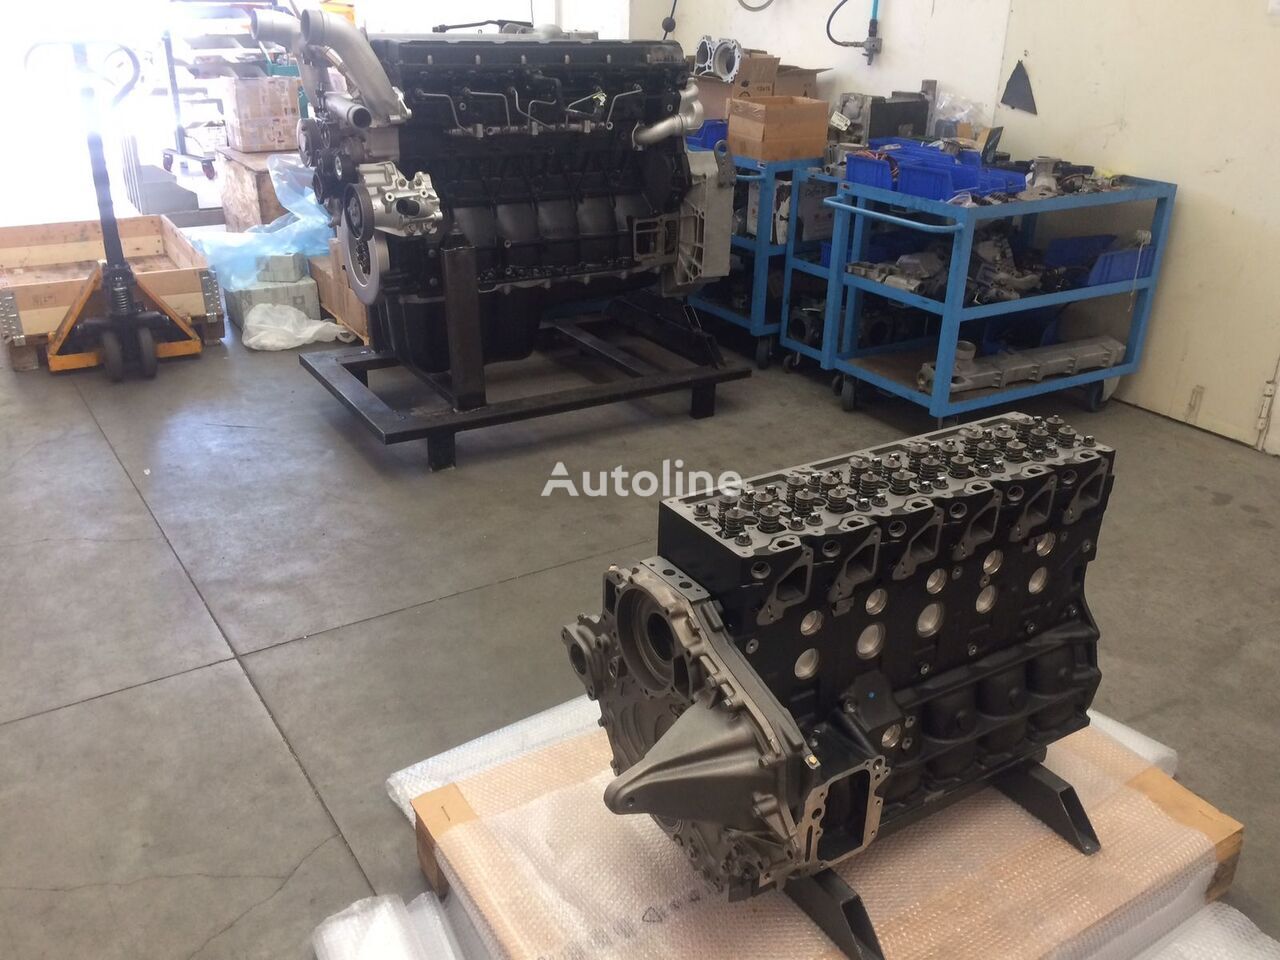 Engine for Bus MAN MOTORE D0836LUH41 - 240CV - EURO 3 - BUS - Orizzontale: picture 13